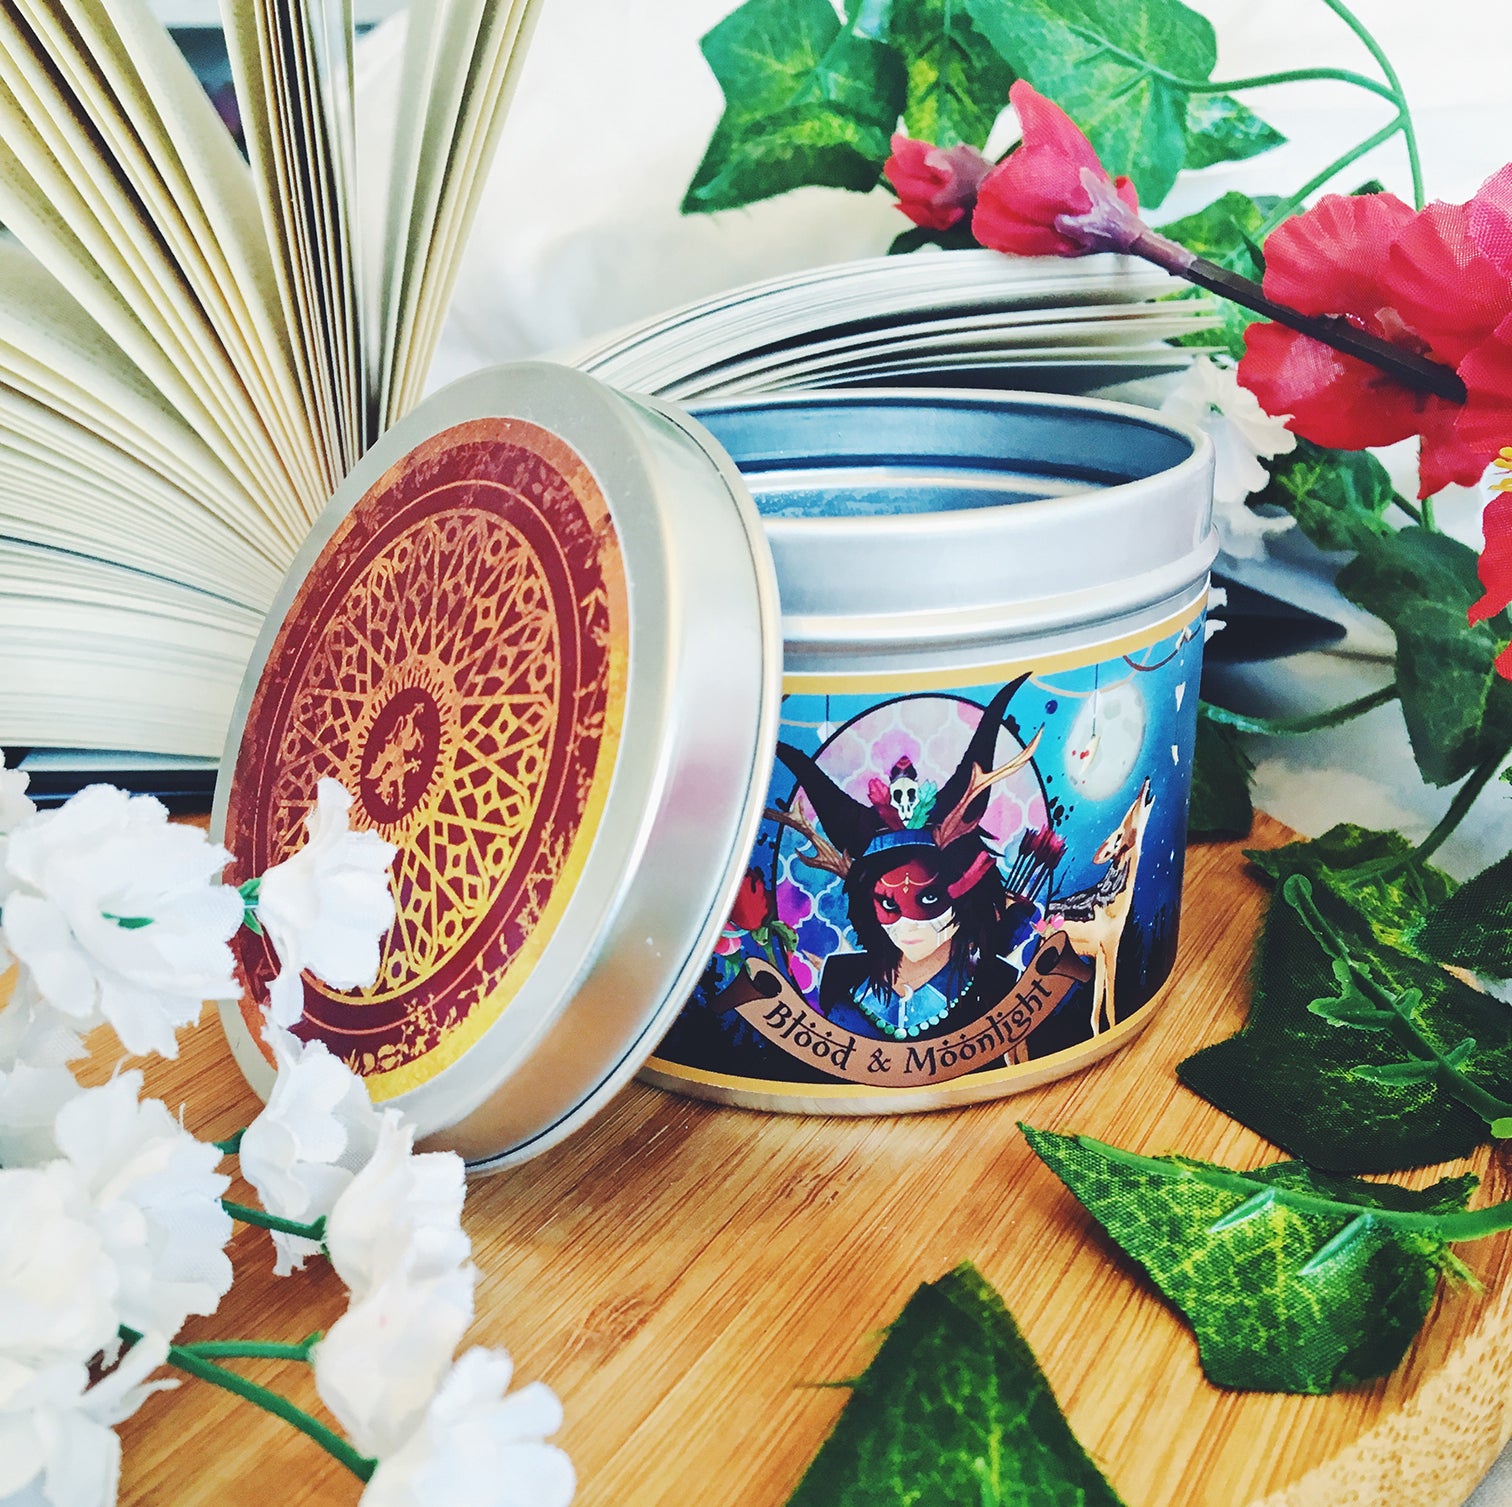 Iskari scented candle inspired by the Last Namsara book.